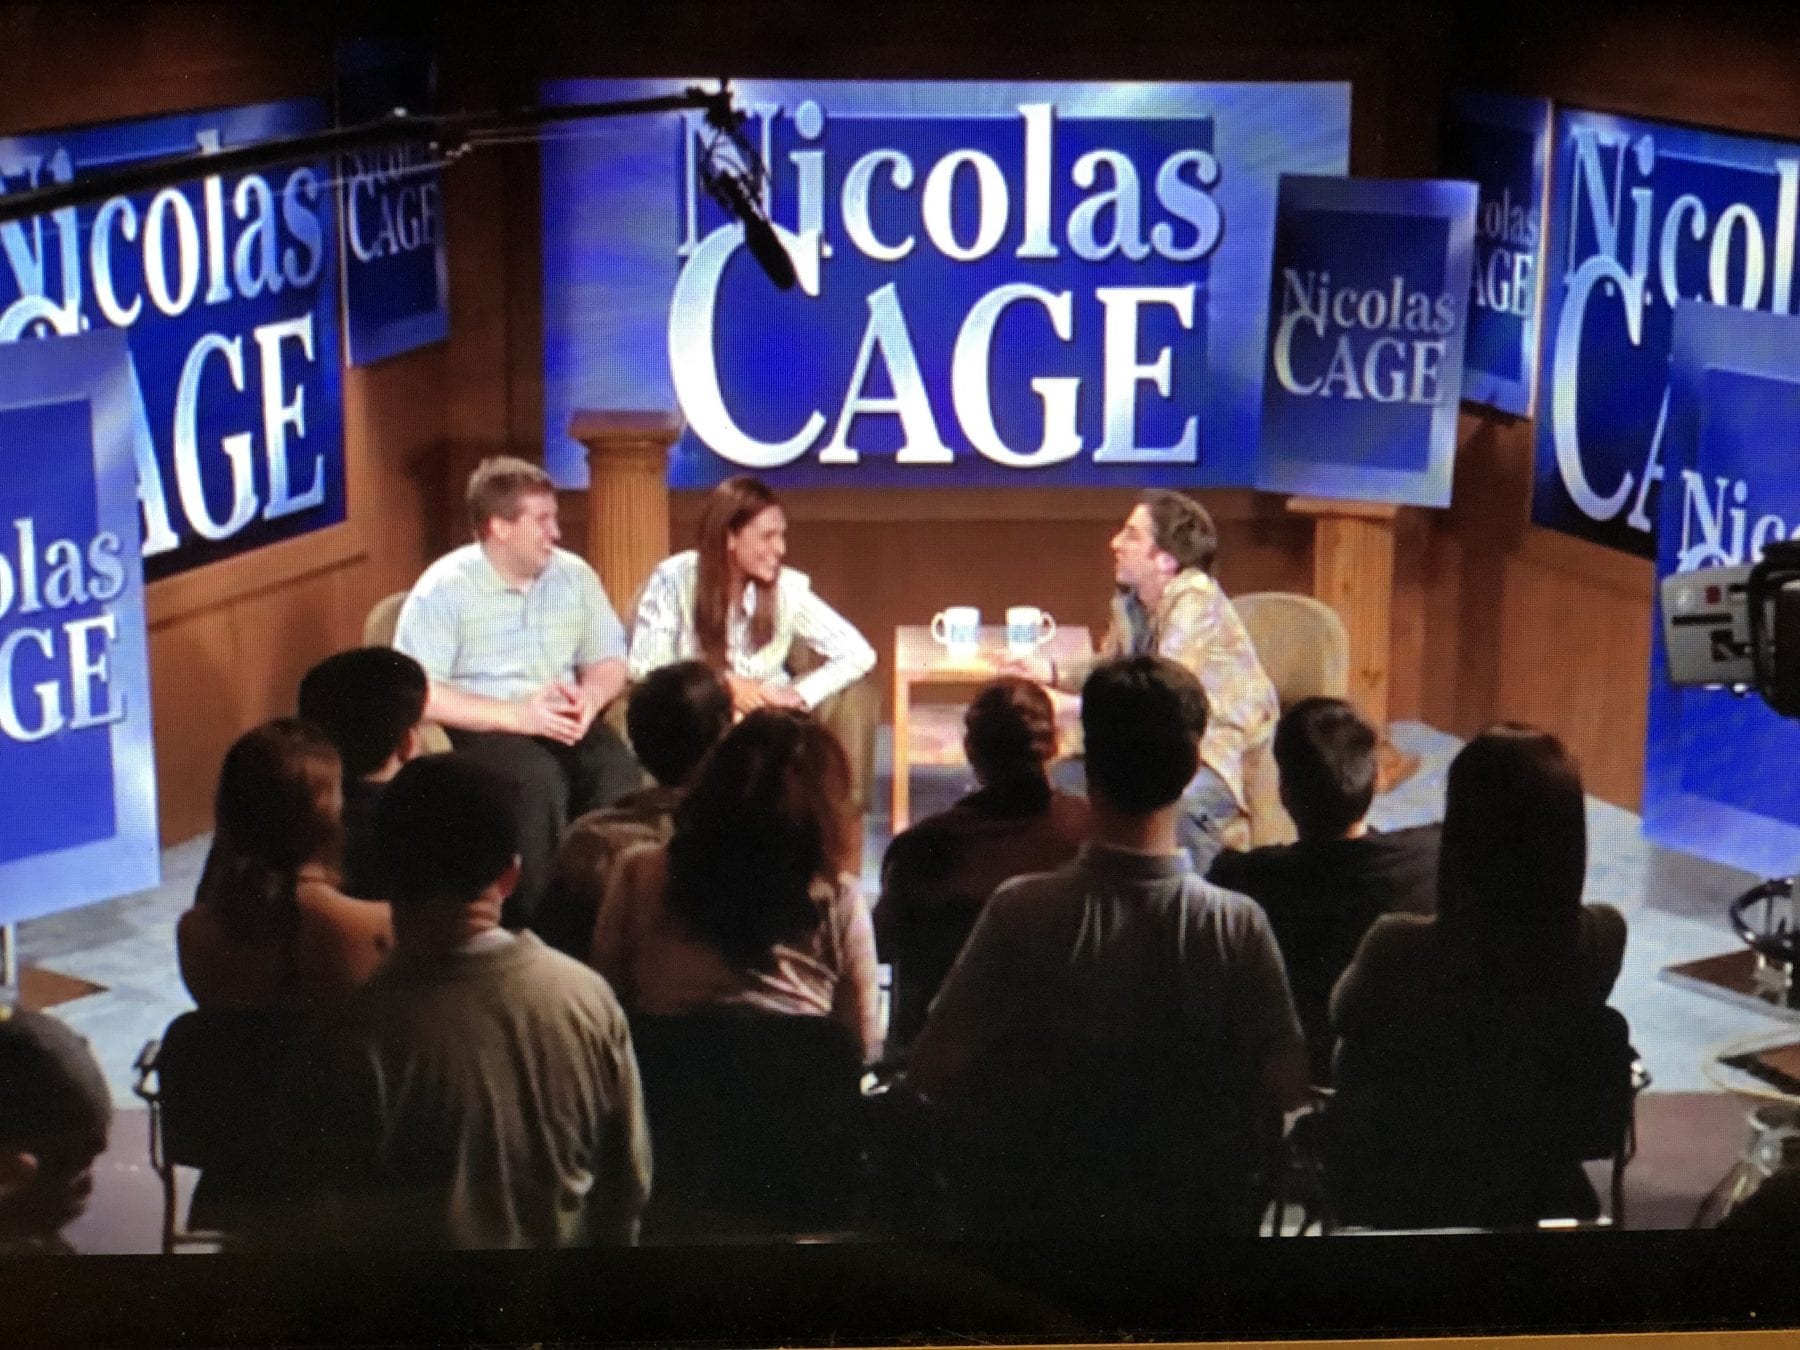 A sketch in which Nicholas Cage is a talk show host